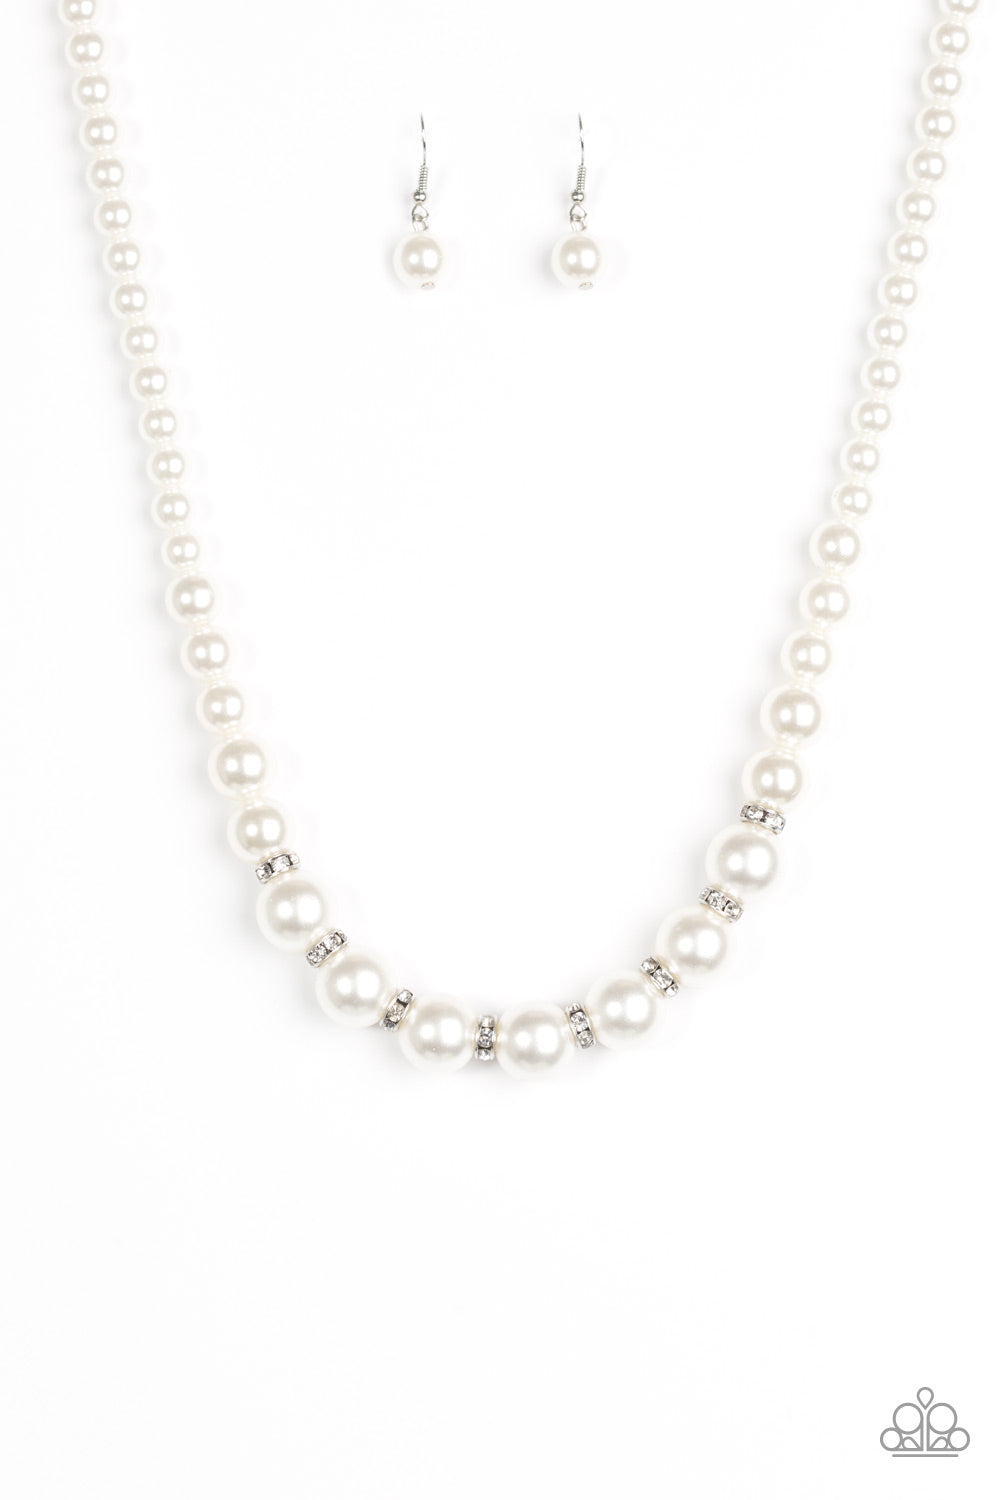 . Showtime Shimmer - White Necklace